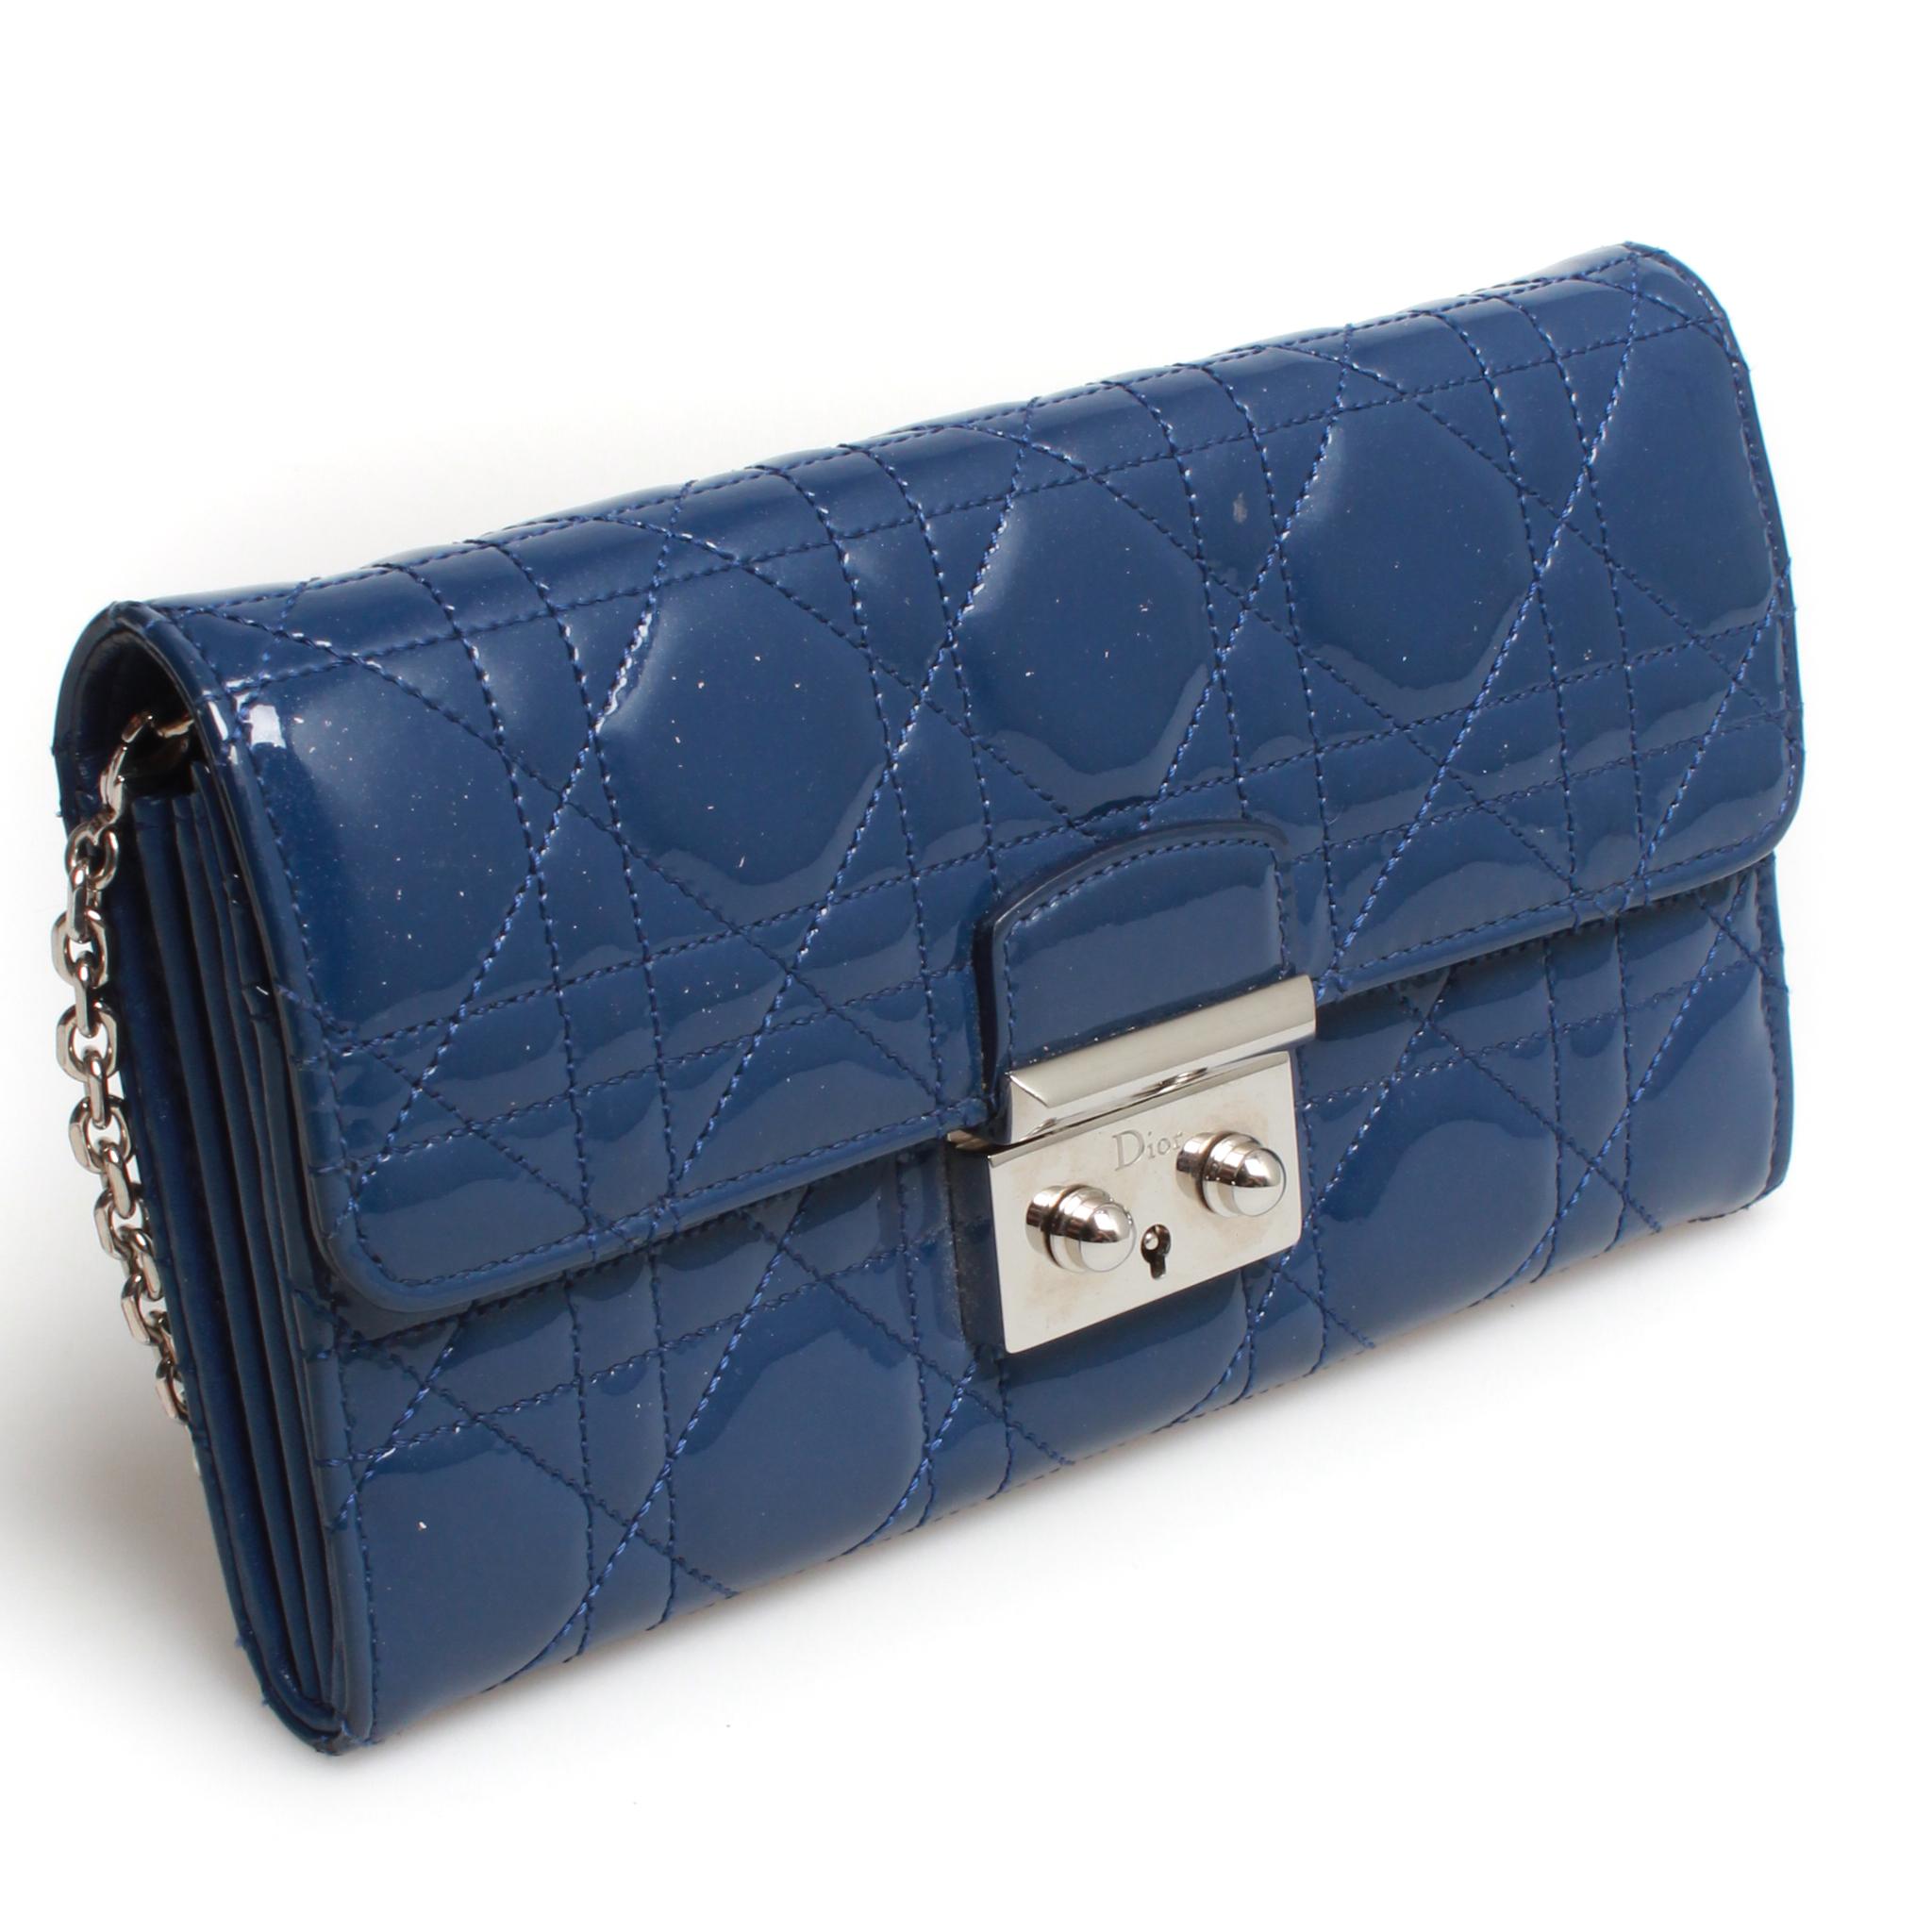 Patent leather quilted Miss Dior Rendezvous wallet on chain with silver hardware.
